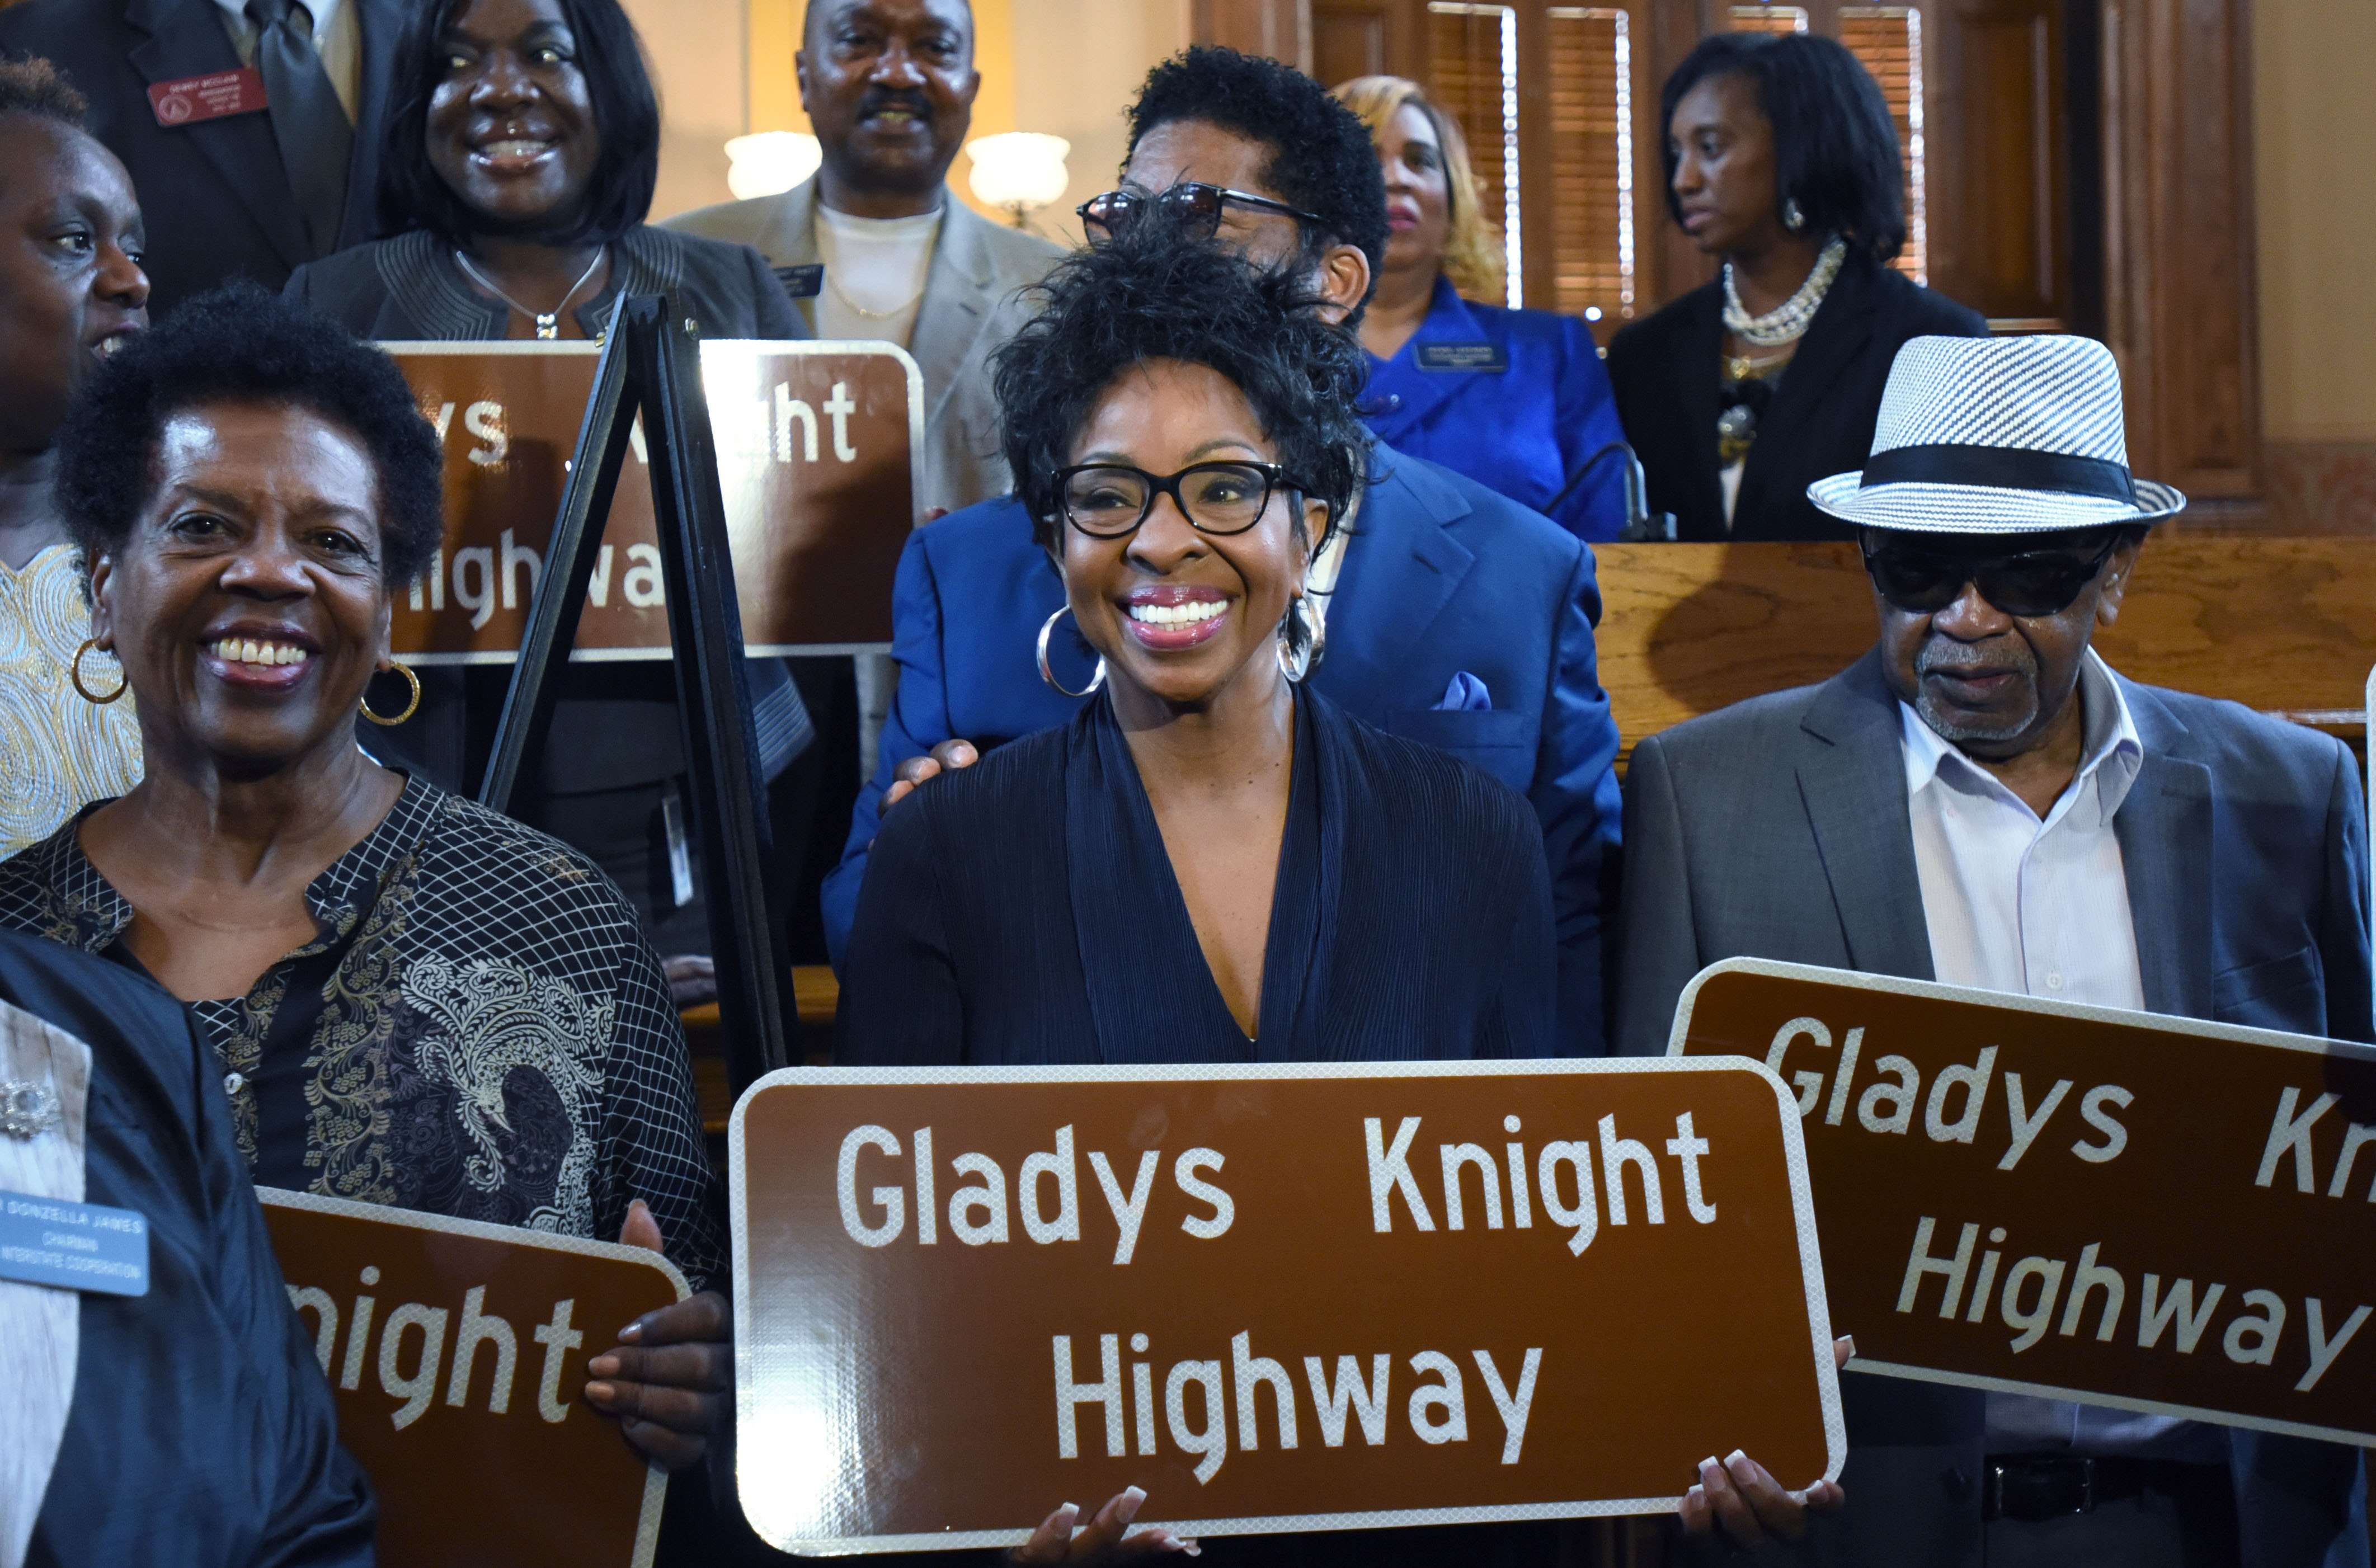 Gladys Knight Highway: Georgia honored the Empress of Soul with road in her  name.